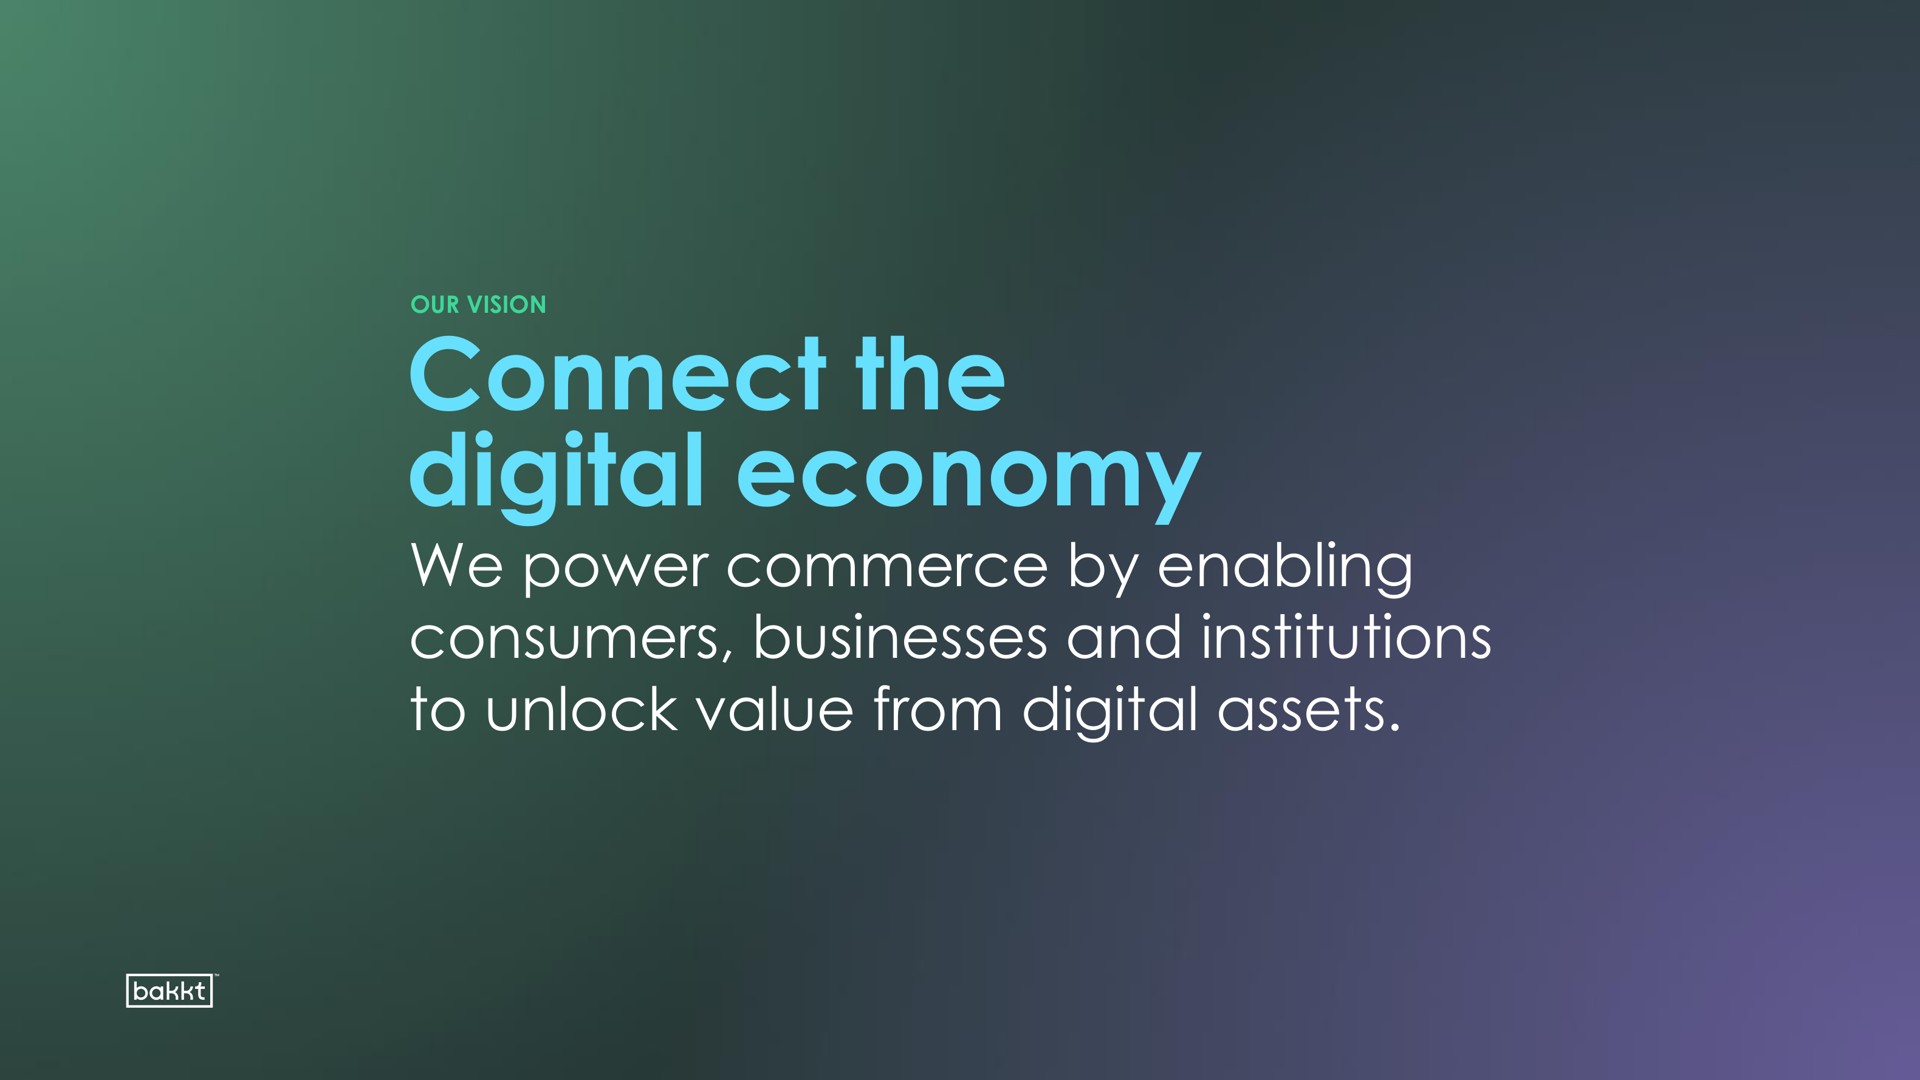 connect the digital economy we power commerce by enabling consumers businesses and institutions to unlock value from digital assets | Bakkt